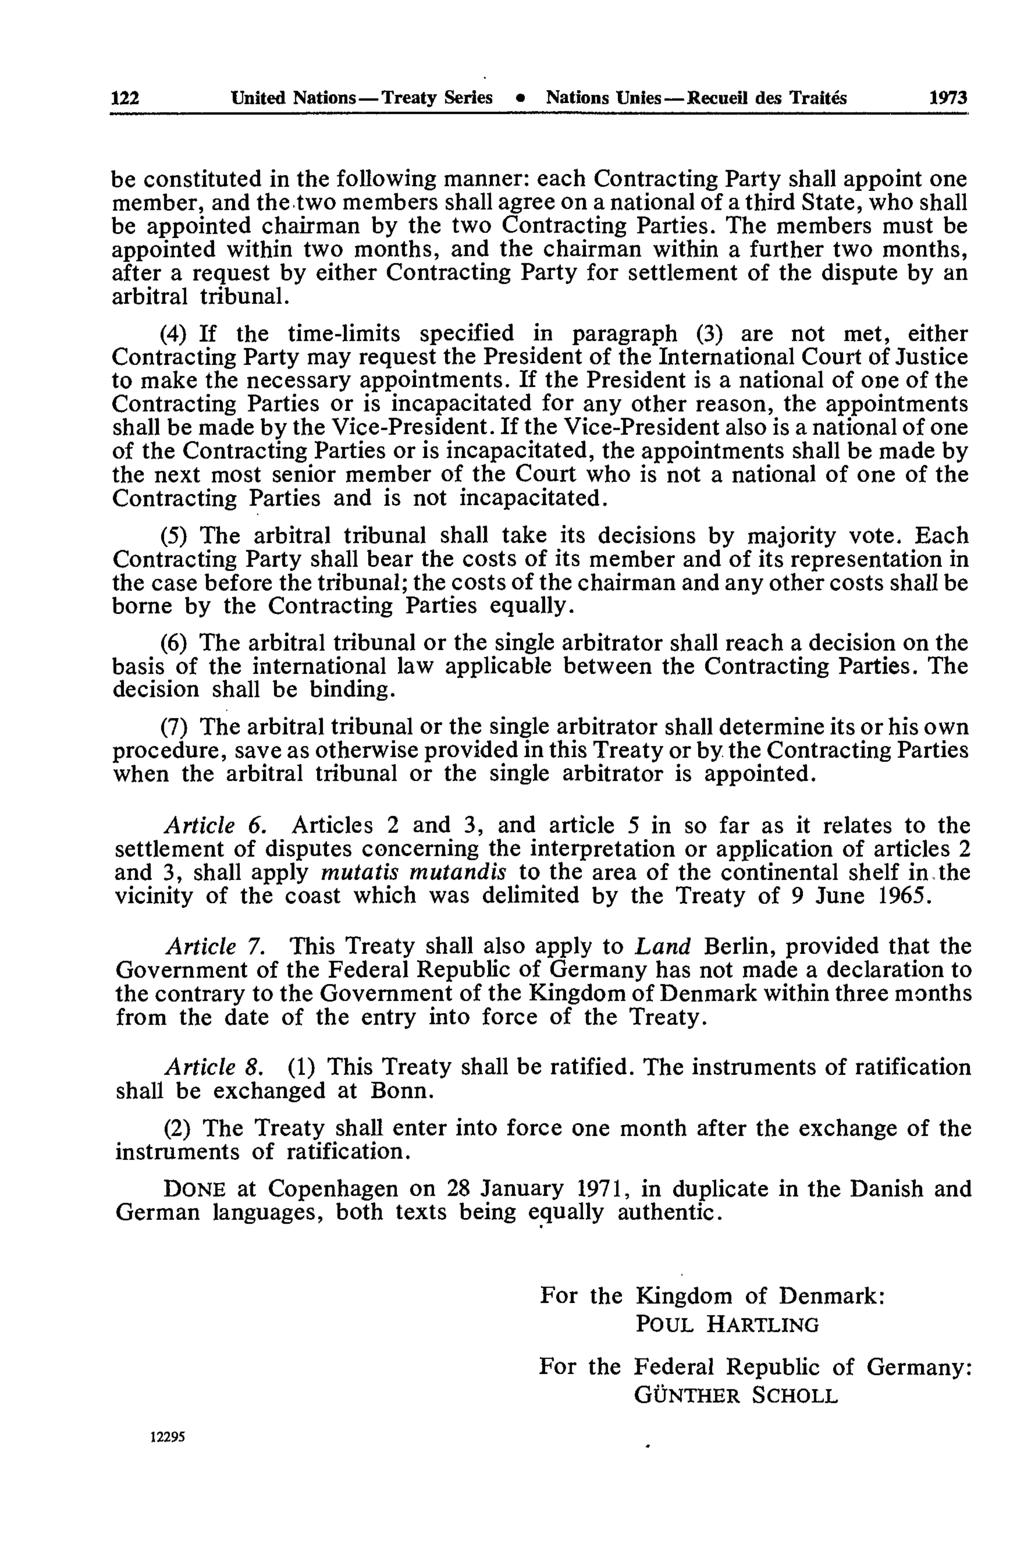 122 United Nations Treaty Series Nations Unies Recueil des Traités 1973 be constituted in the following manner: each Contracting Party shall appoint one member, and the two members shall agree on a